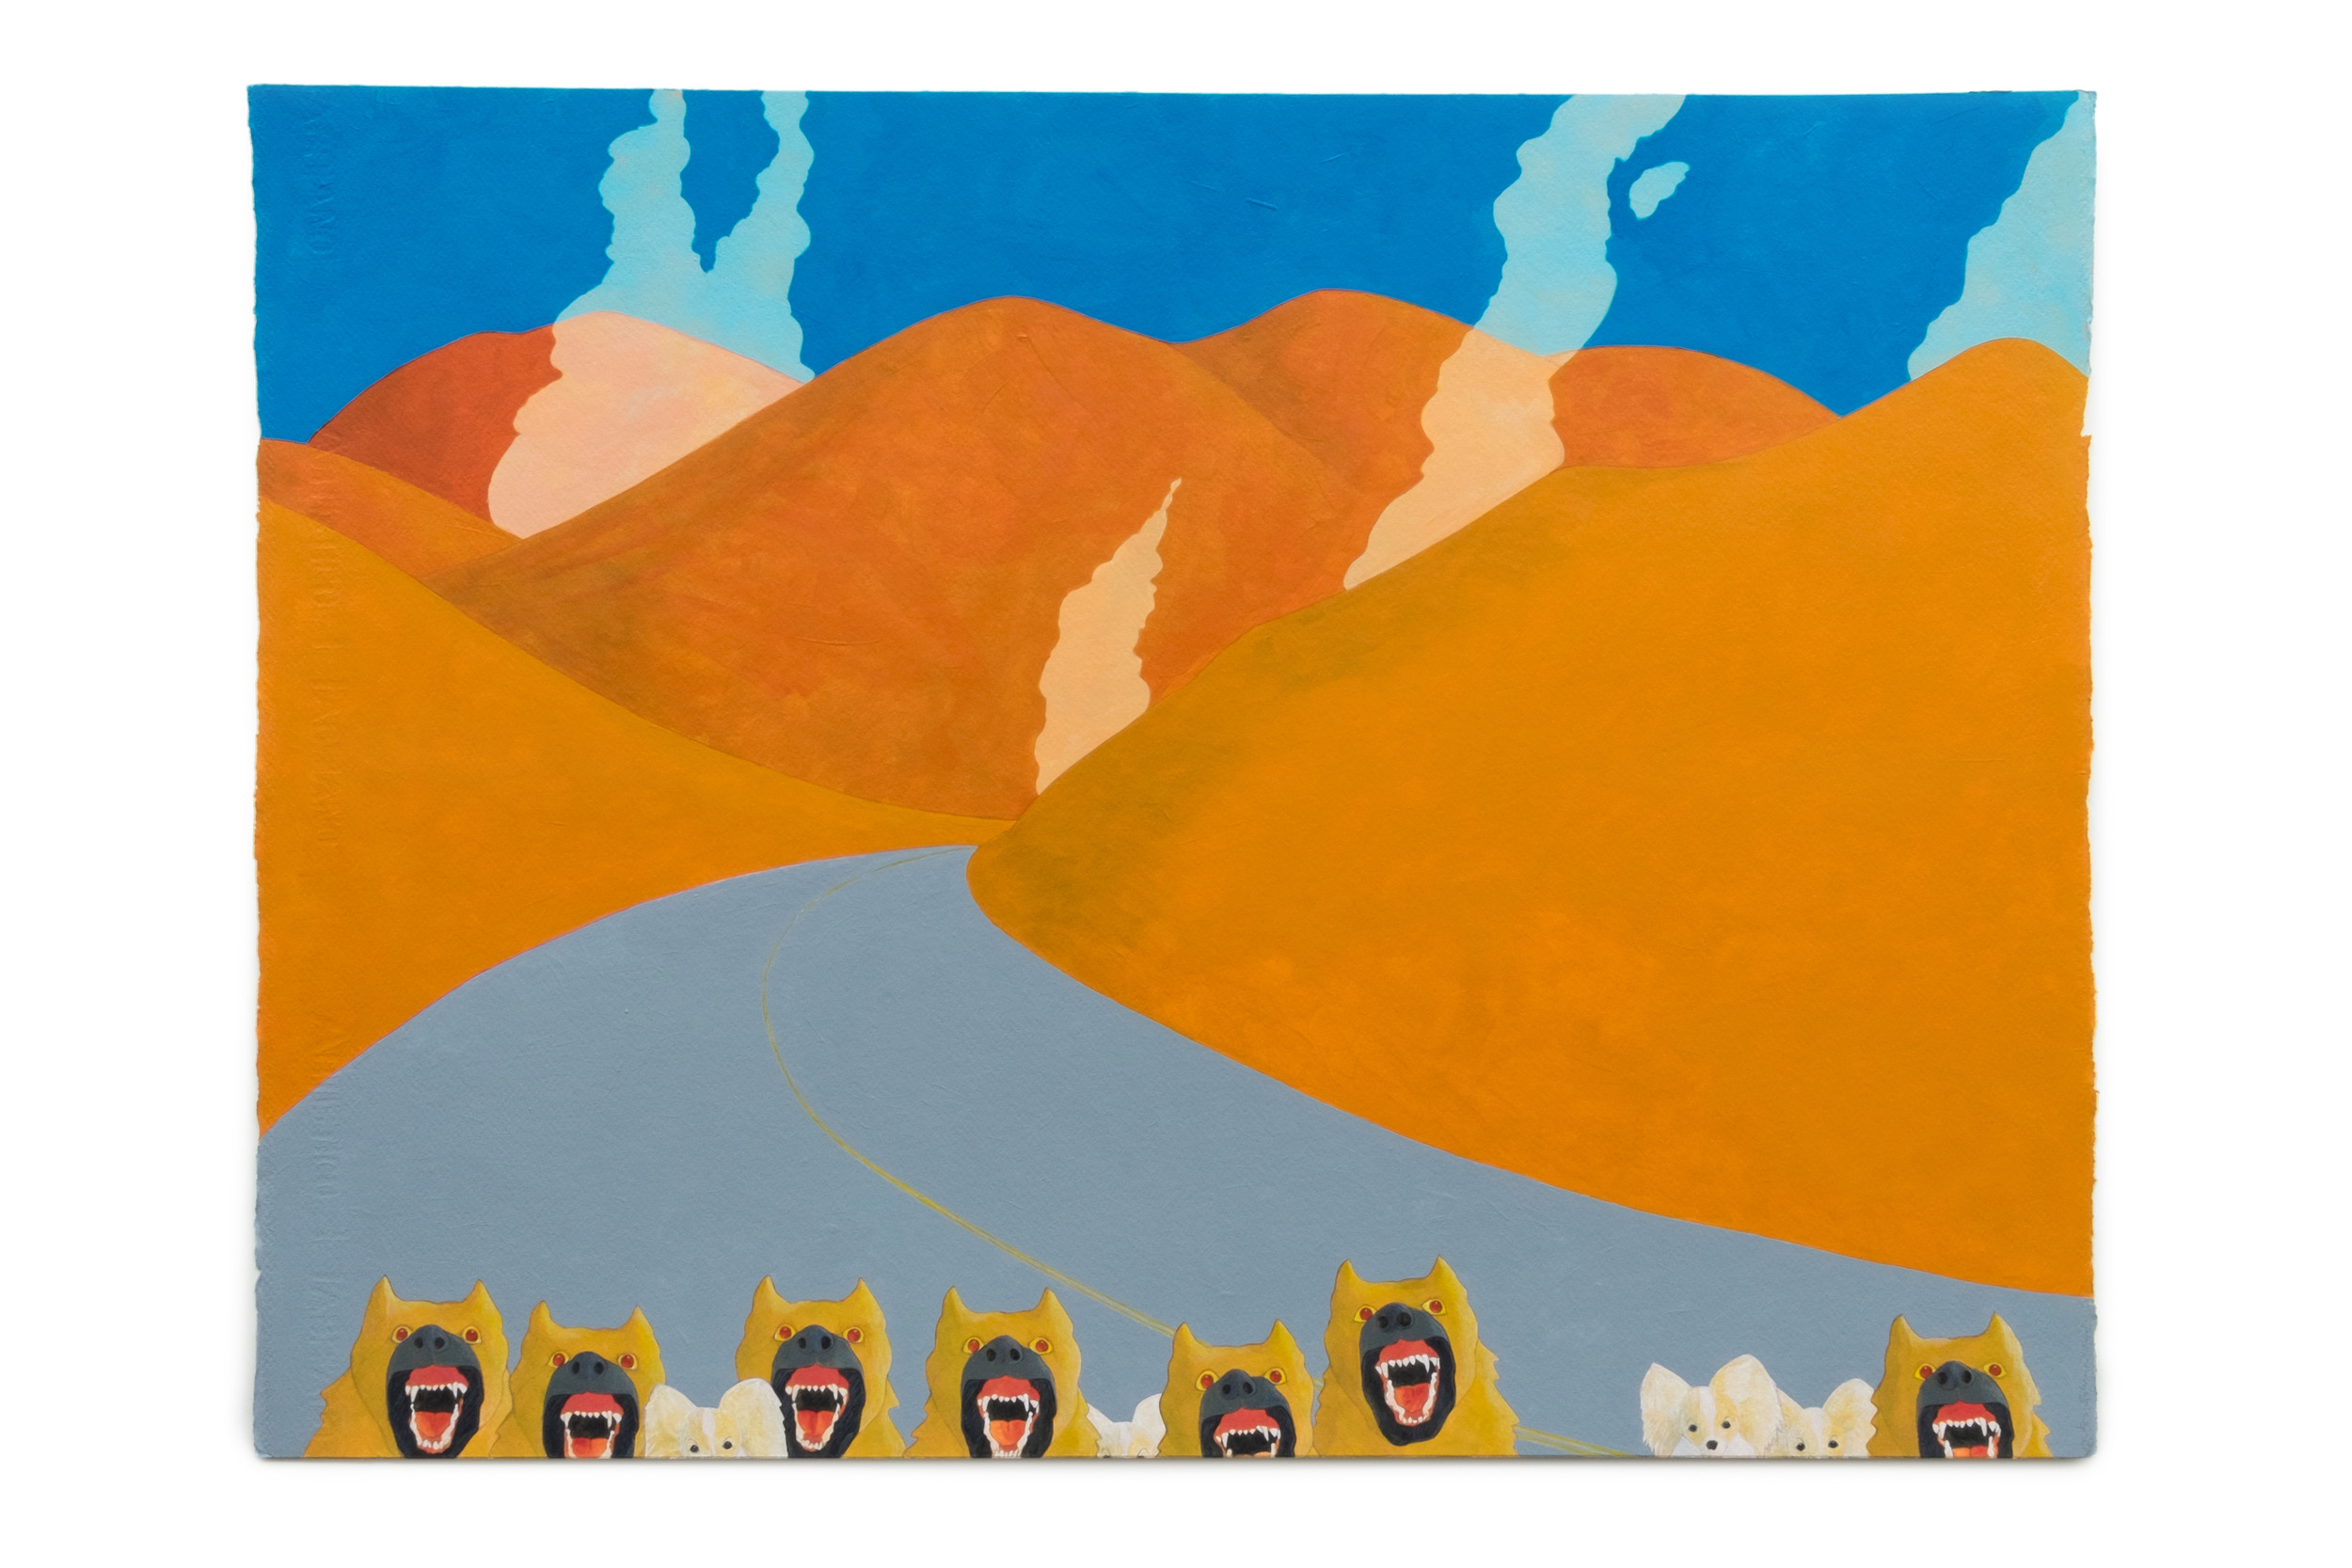   The Road to Yakima,  2013  Acrylic on paper, 22” x 30”  